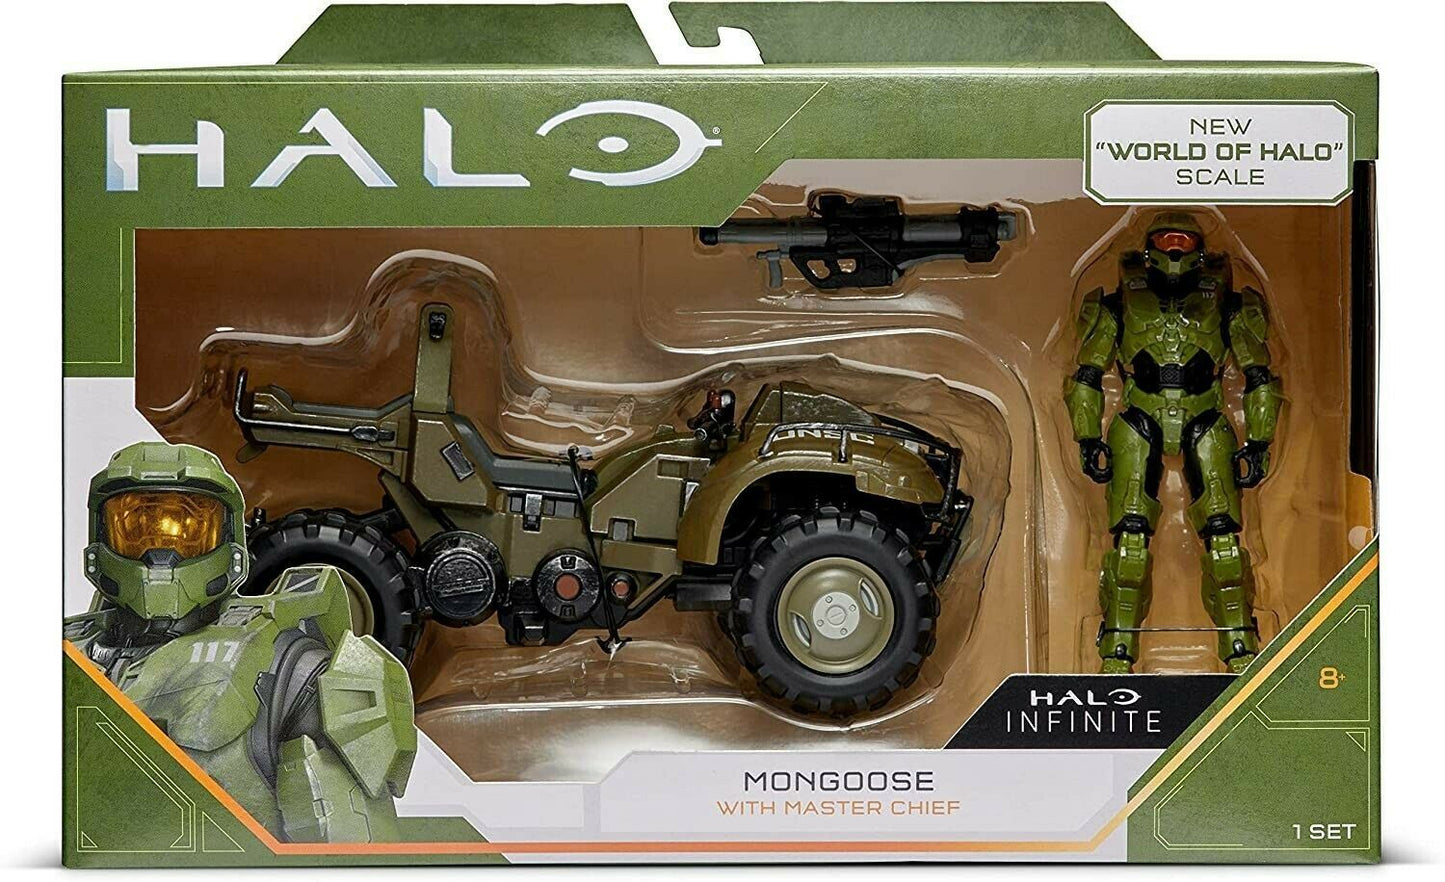 Mongoose with Master Chief 4" Figure and Vehicle World of Halo Infinite HLW0013